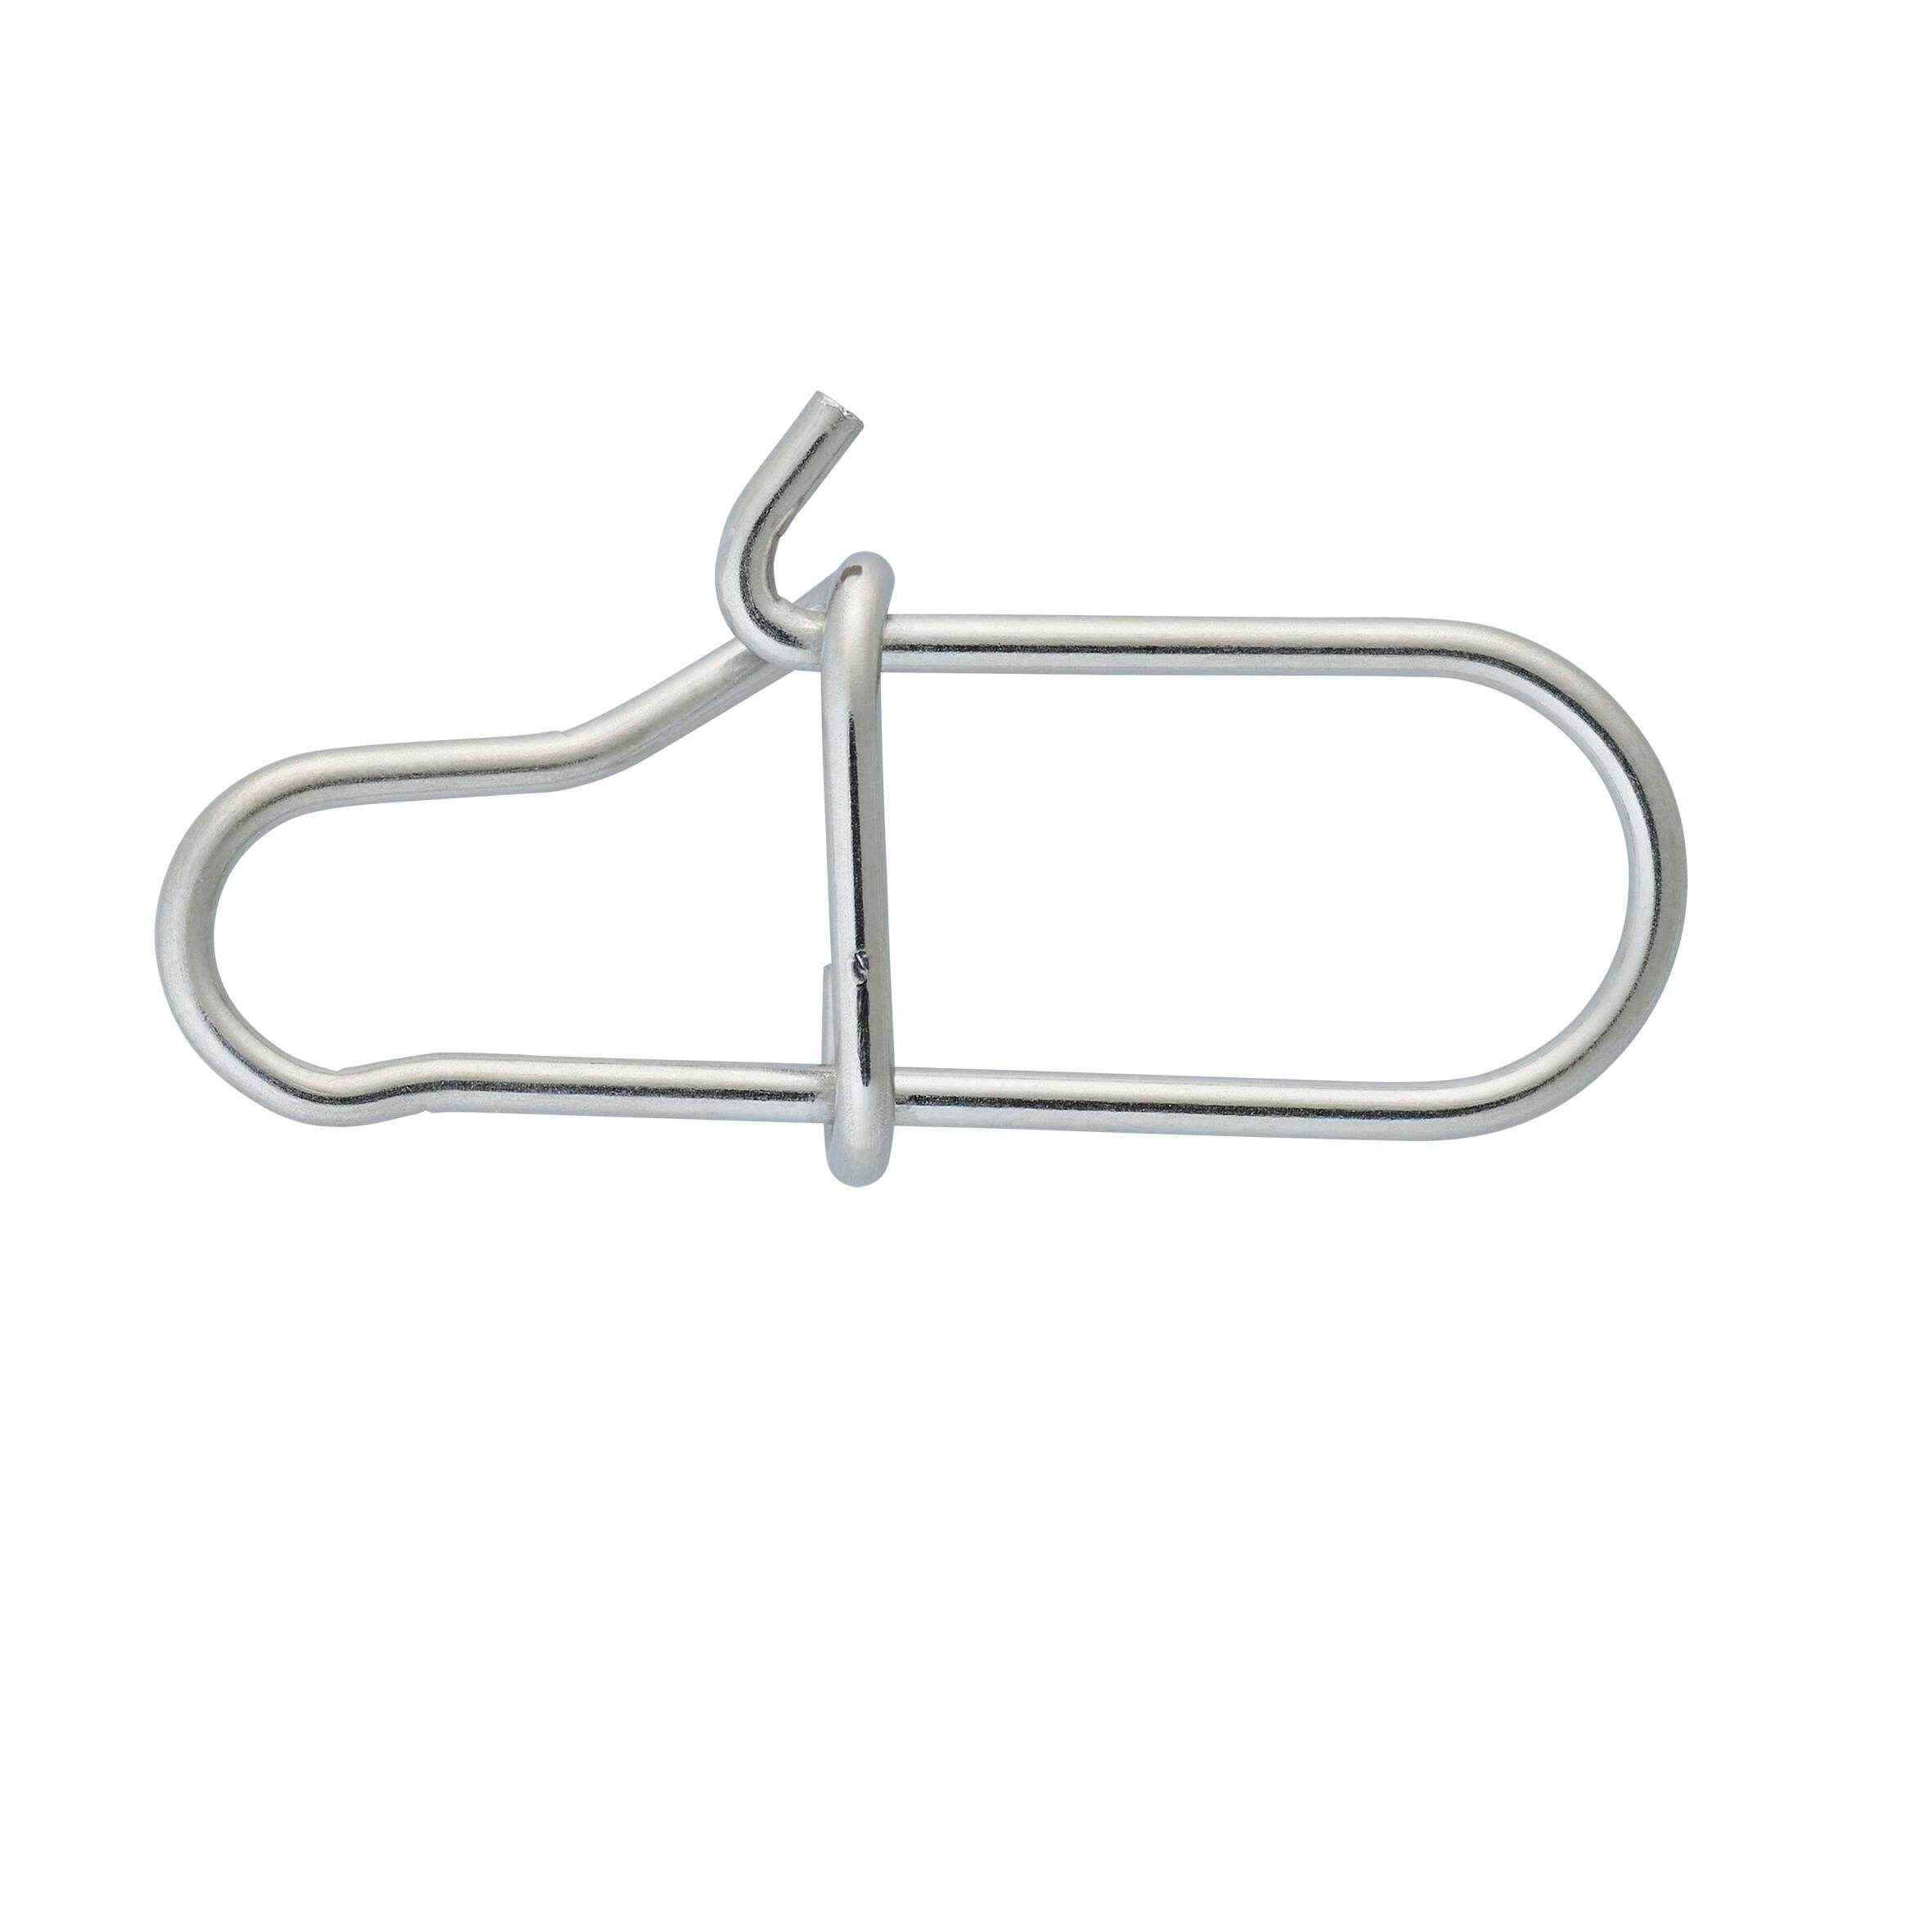 Fishing Stainless Steel Double Snap Clips x10 - CAPERLAN